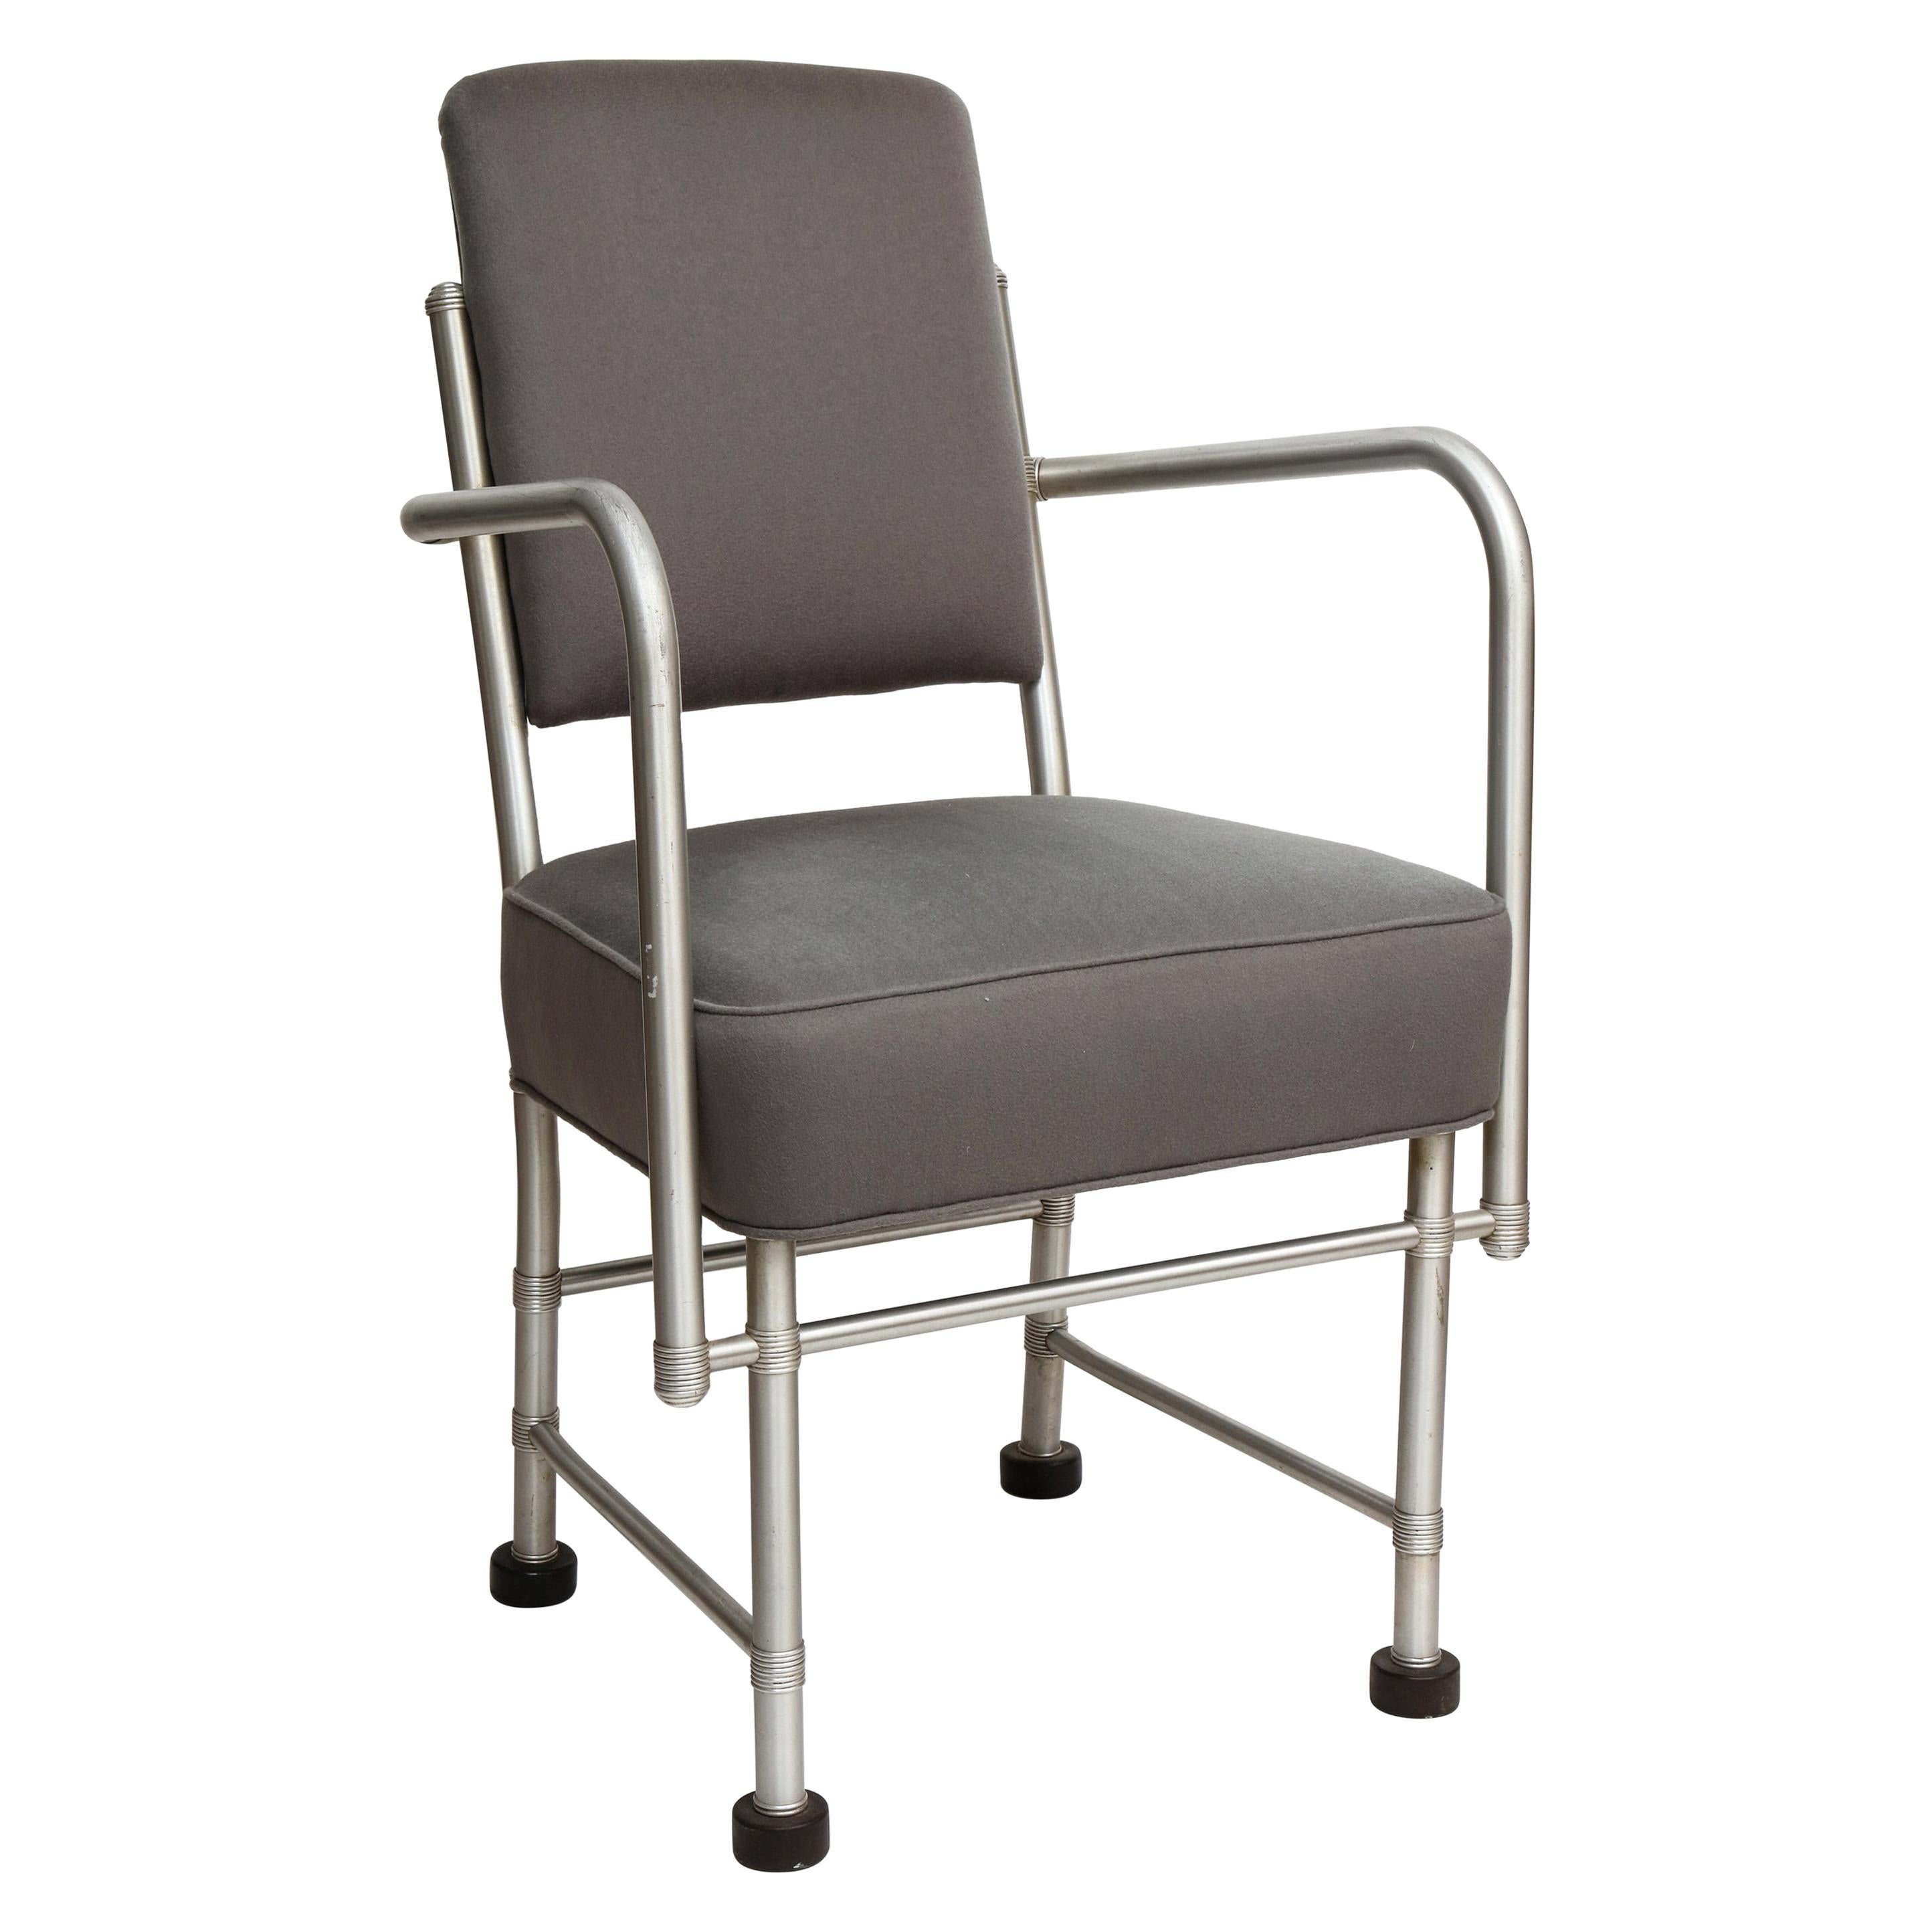 A rare Art Deco Machine Age aluminum armchair by important American designer Warren McArthur. Displays McArthur’s signature Streamline Moderne-meets-Machine Age aesthetic, with a painstakingly crafted multi-piece anodized aluminum tubular frame over